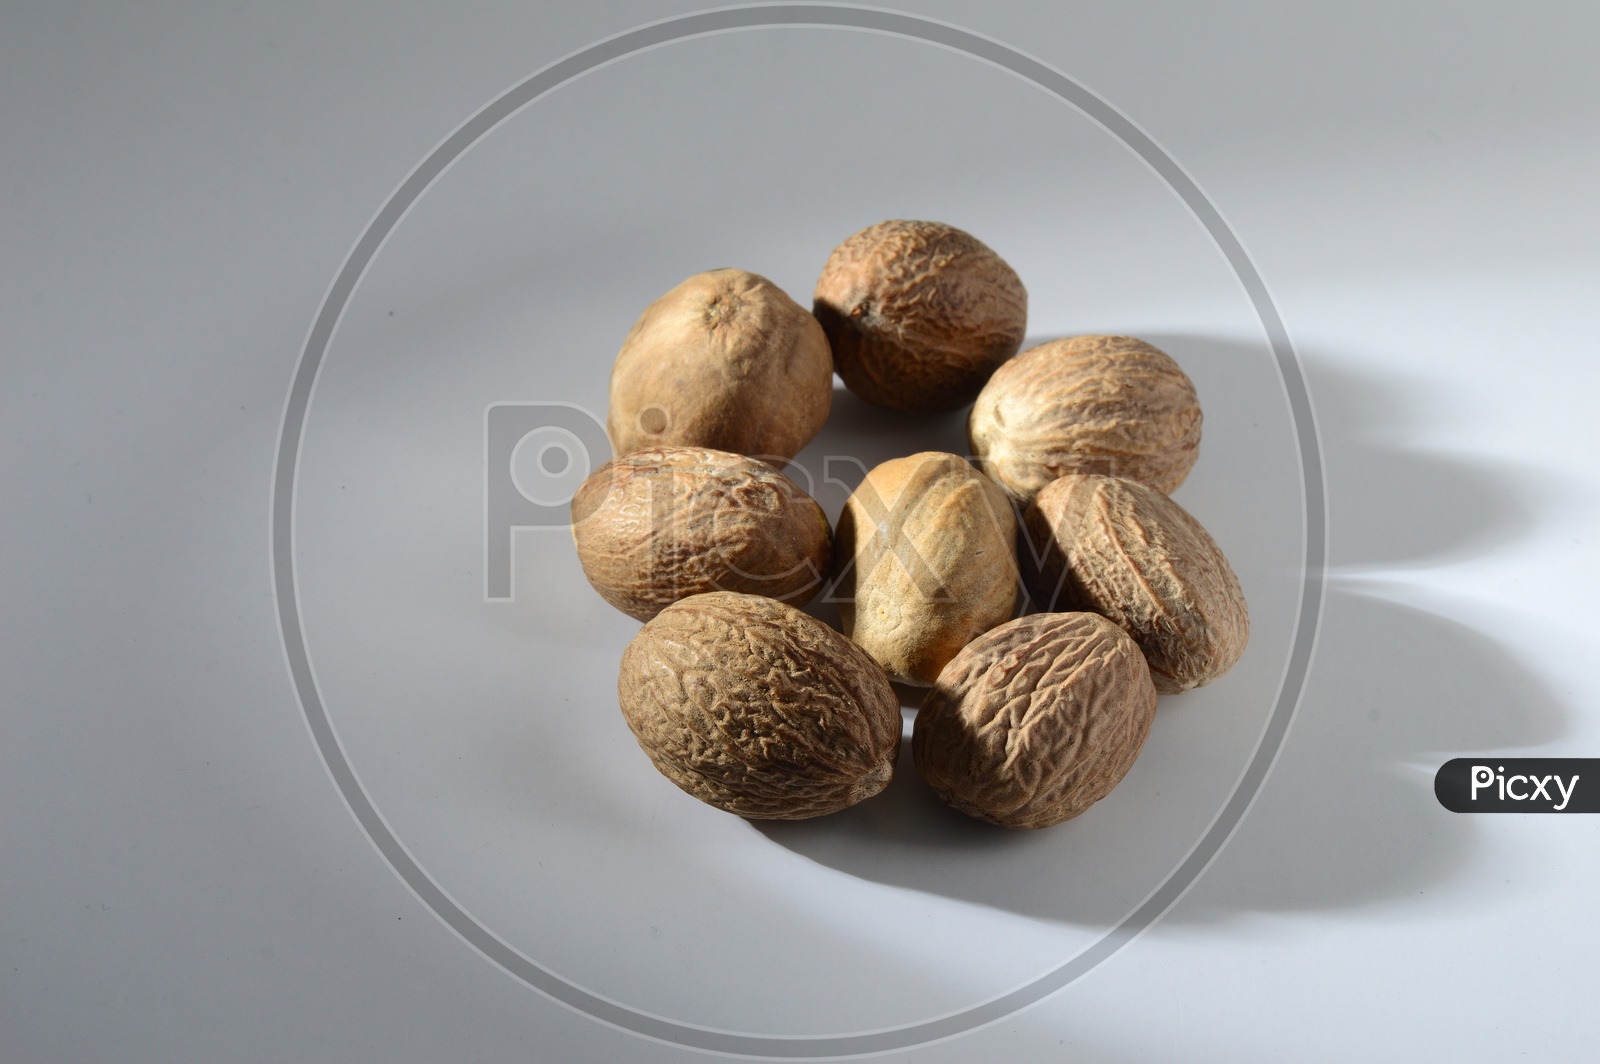 Indian Spice Nutmeg On an Isolated White Background